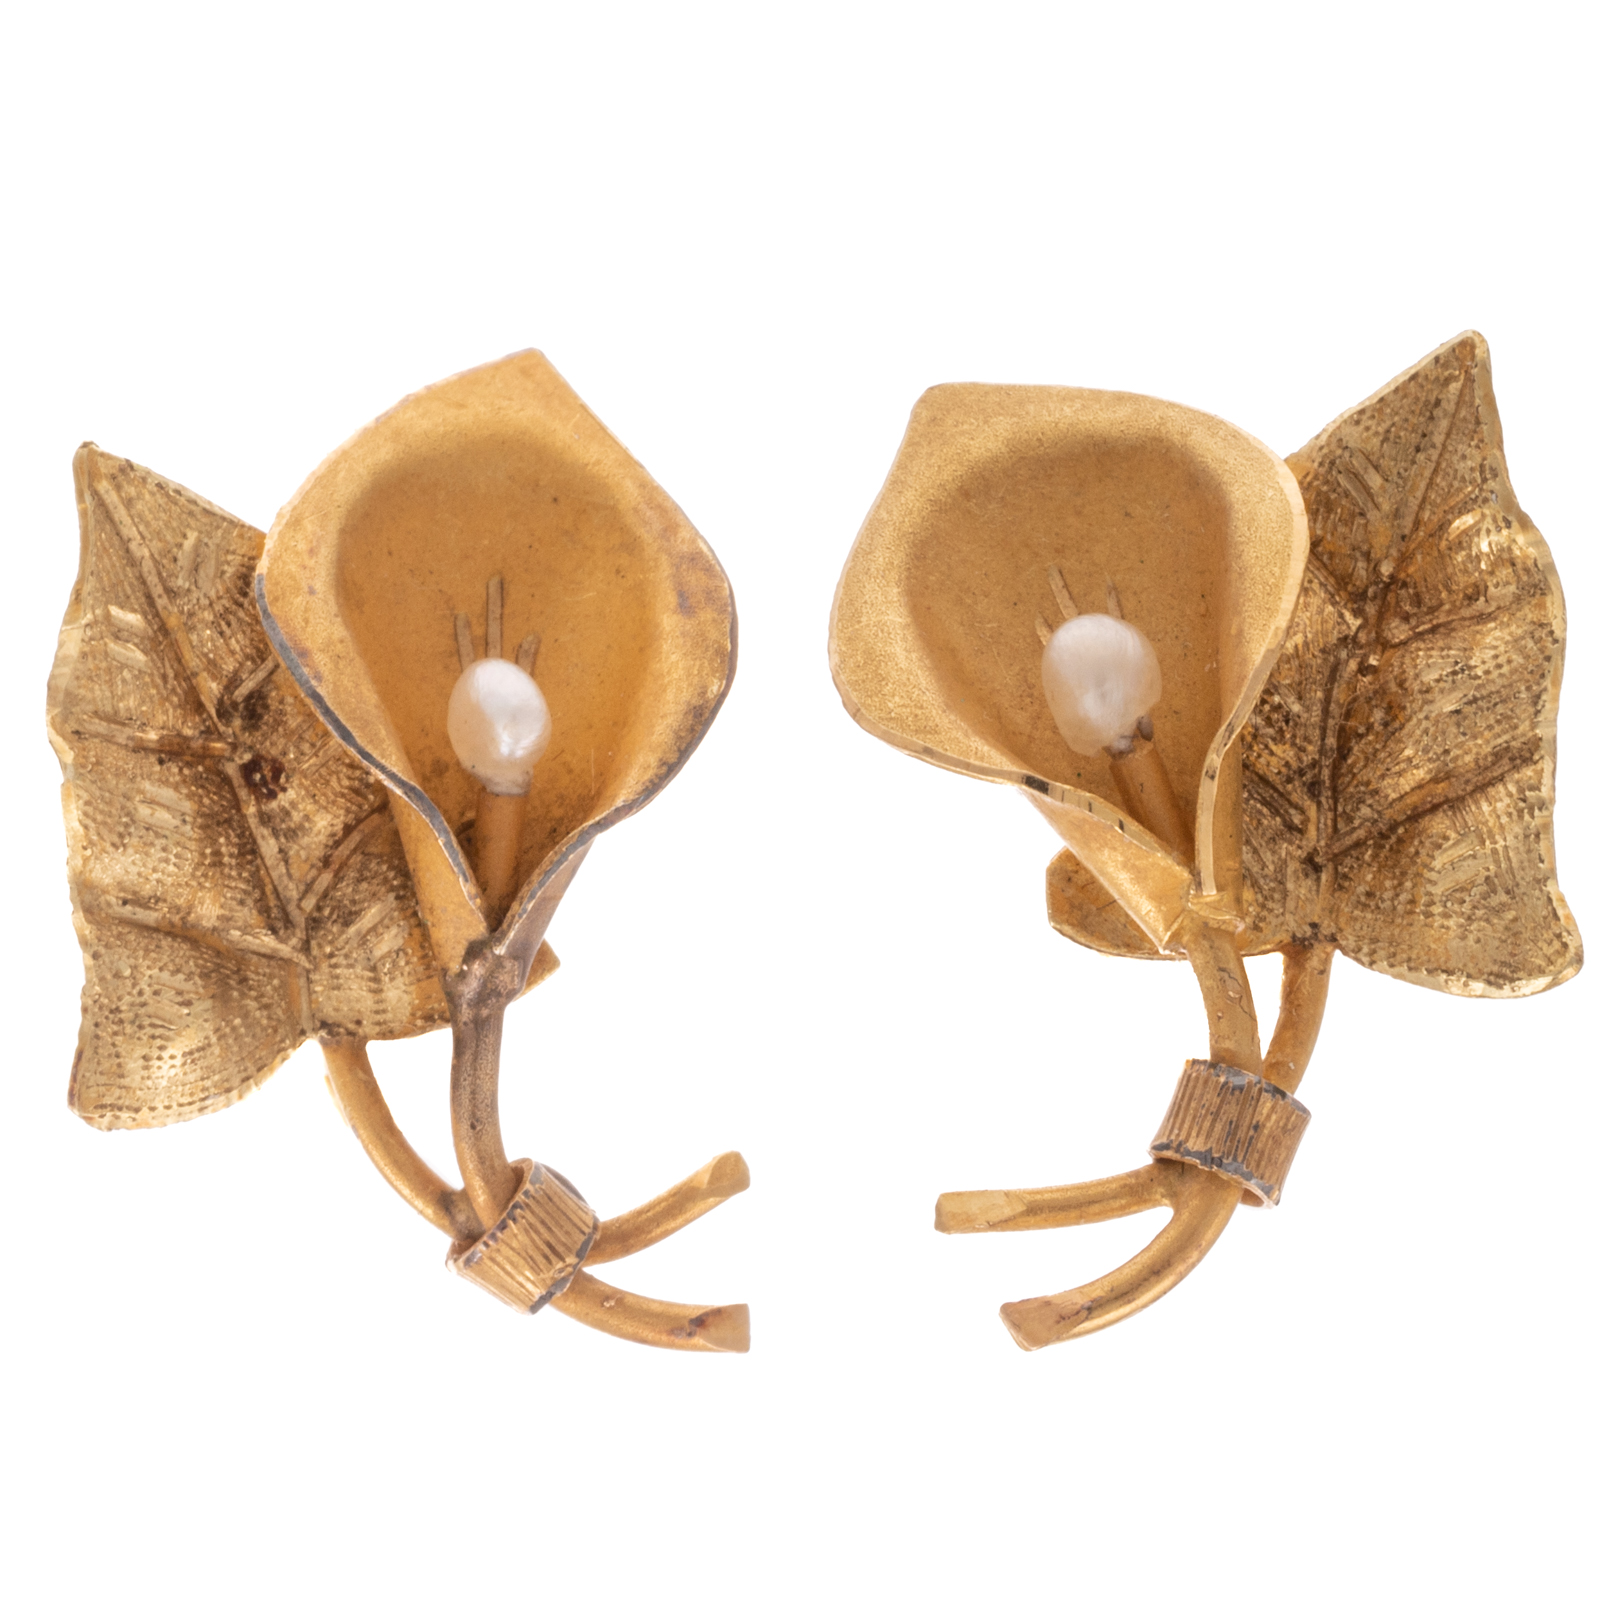 A PAIR OF CALLA LILY EARRINGS IN